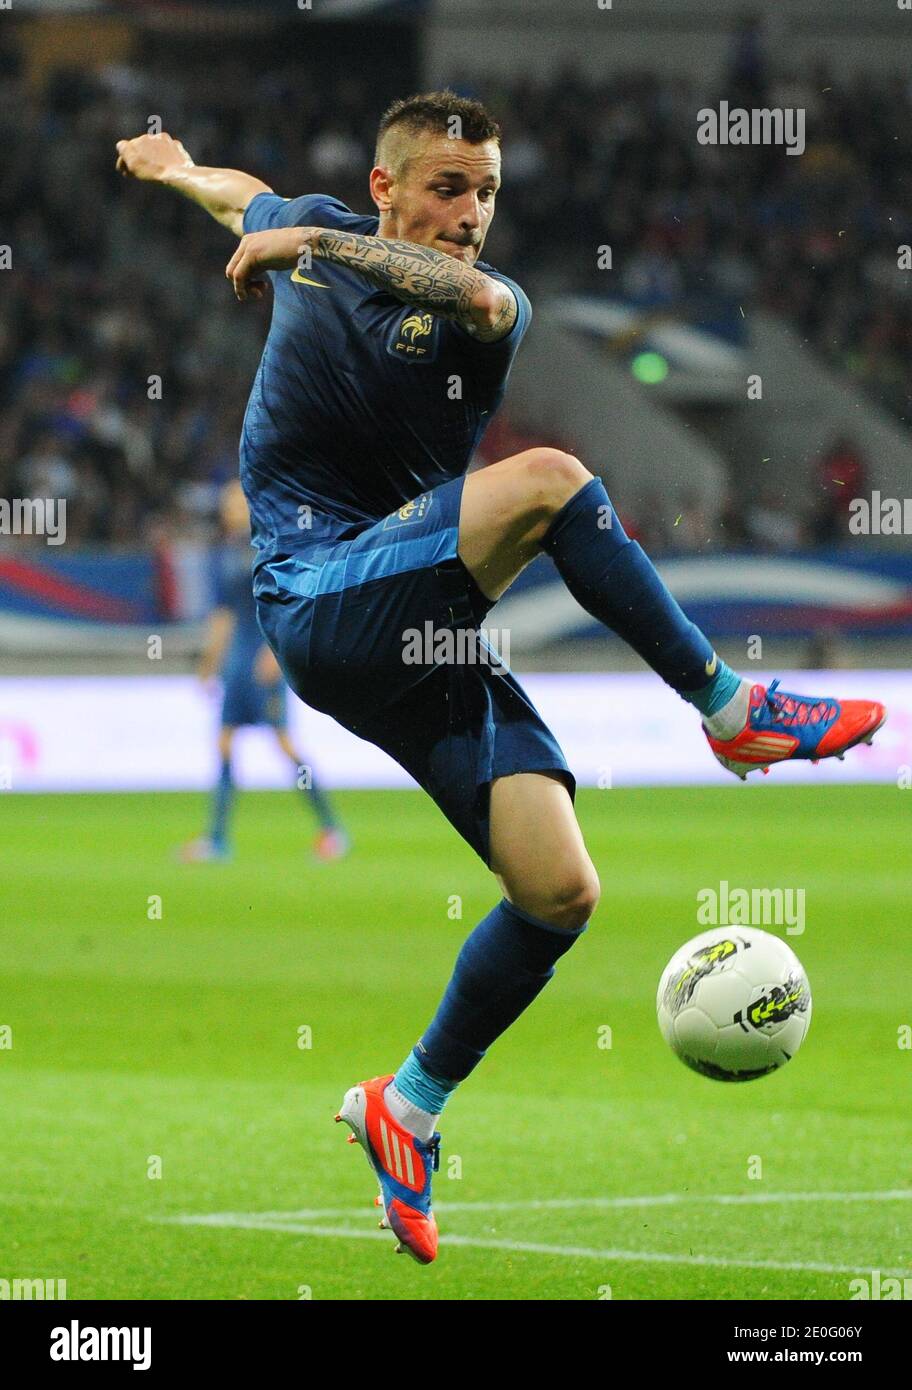 France's Mathieu Debuchy during an International Friendly soccer match, France Vs Estonia at MMArena stadium in Le Mans, France, on June 5, 2012. France won 4-0. Photo by ABACAPRESS.COM Stock Photo